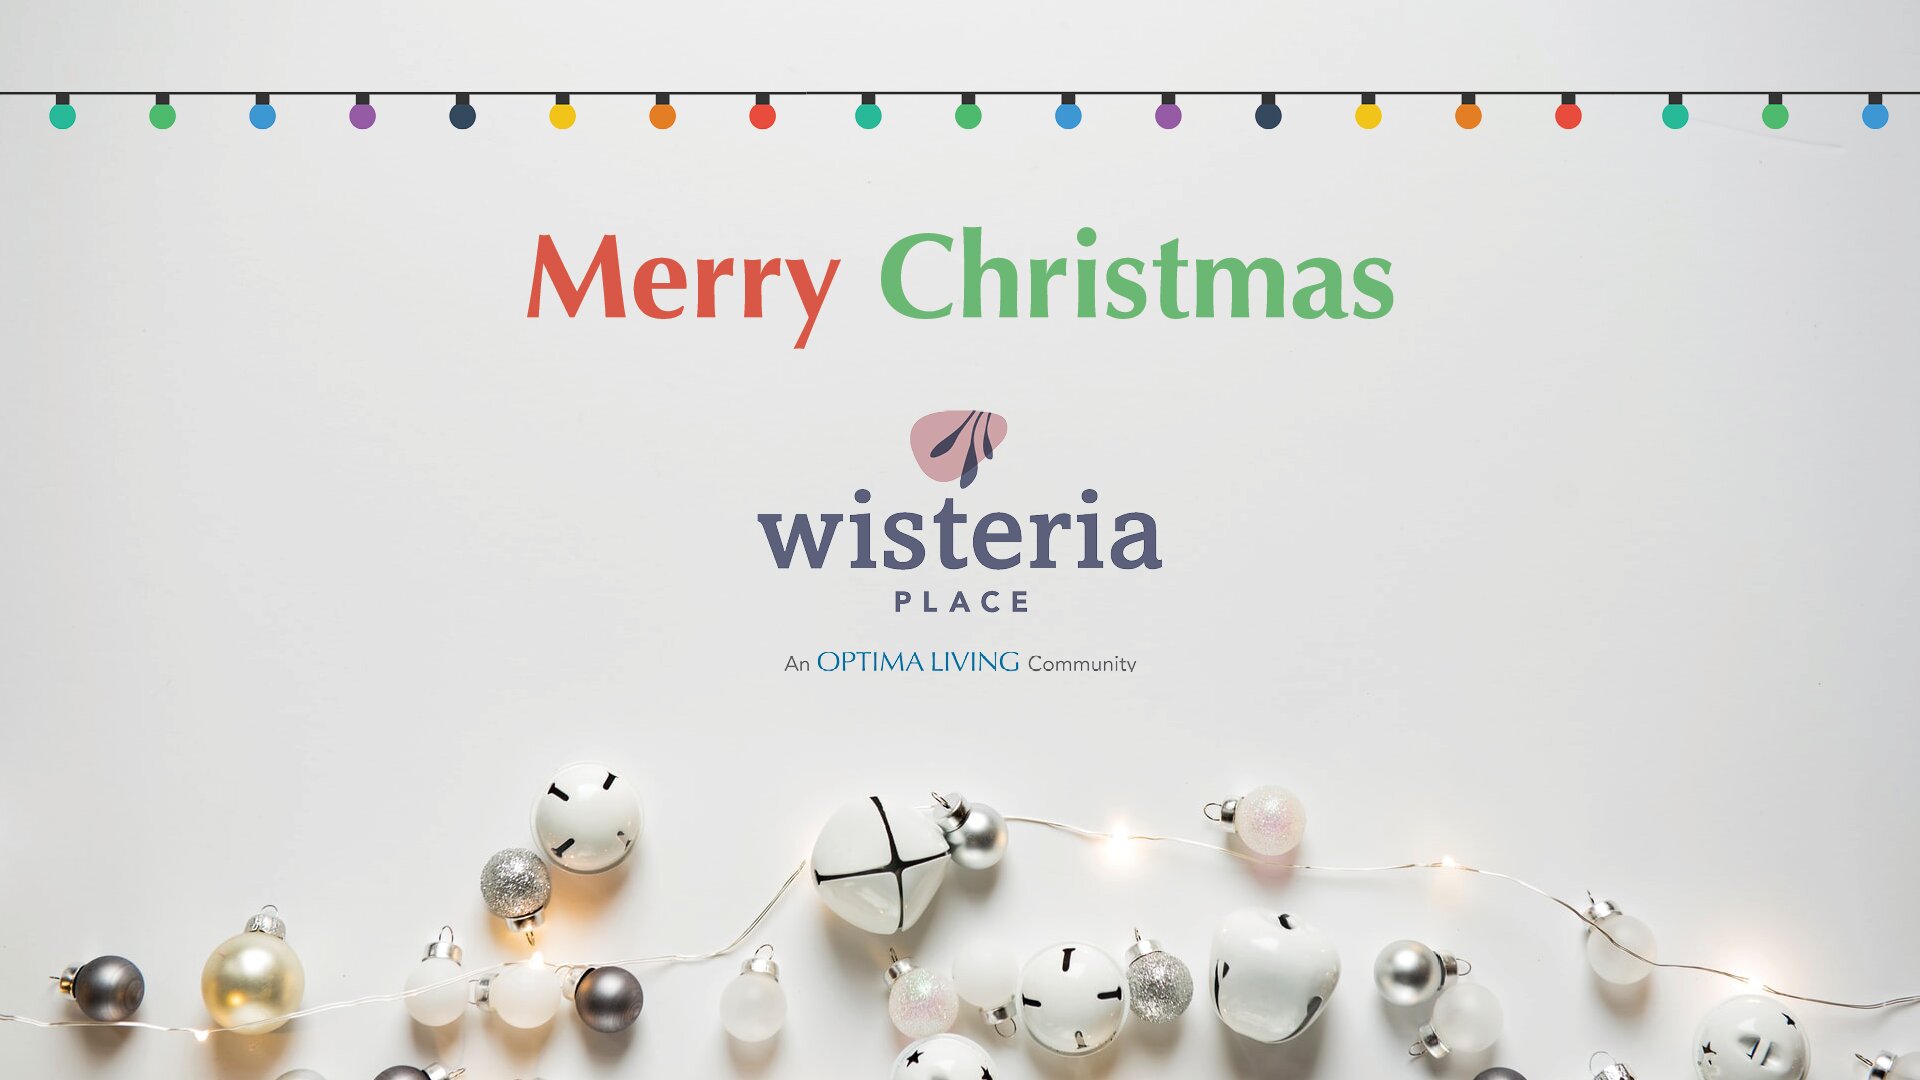 A banner of Wisteria Place seniors home on Christmas